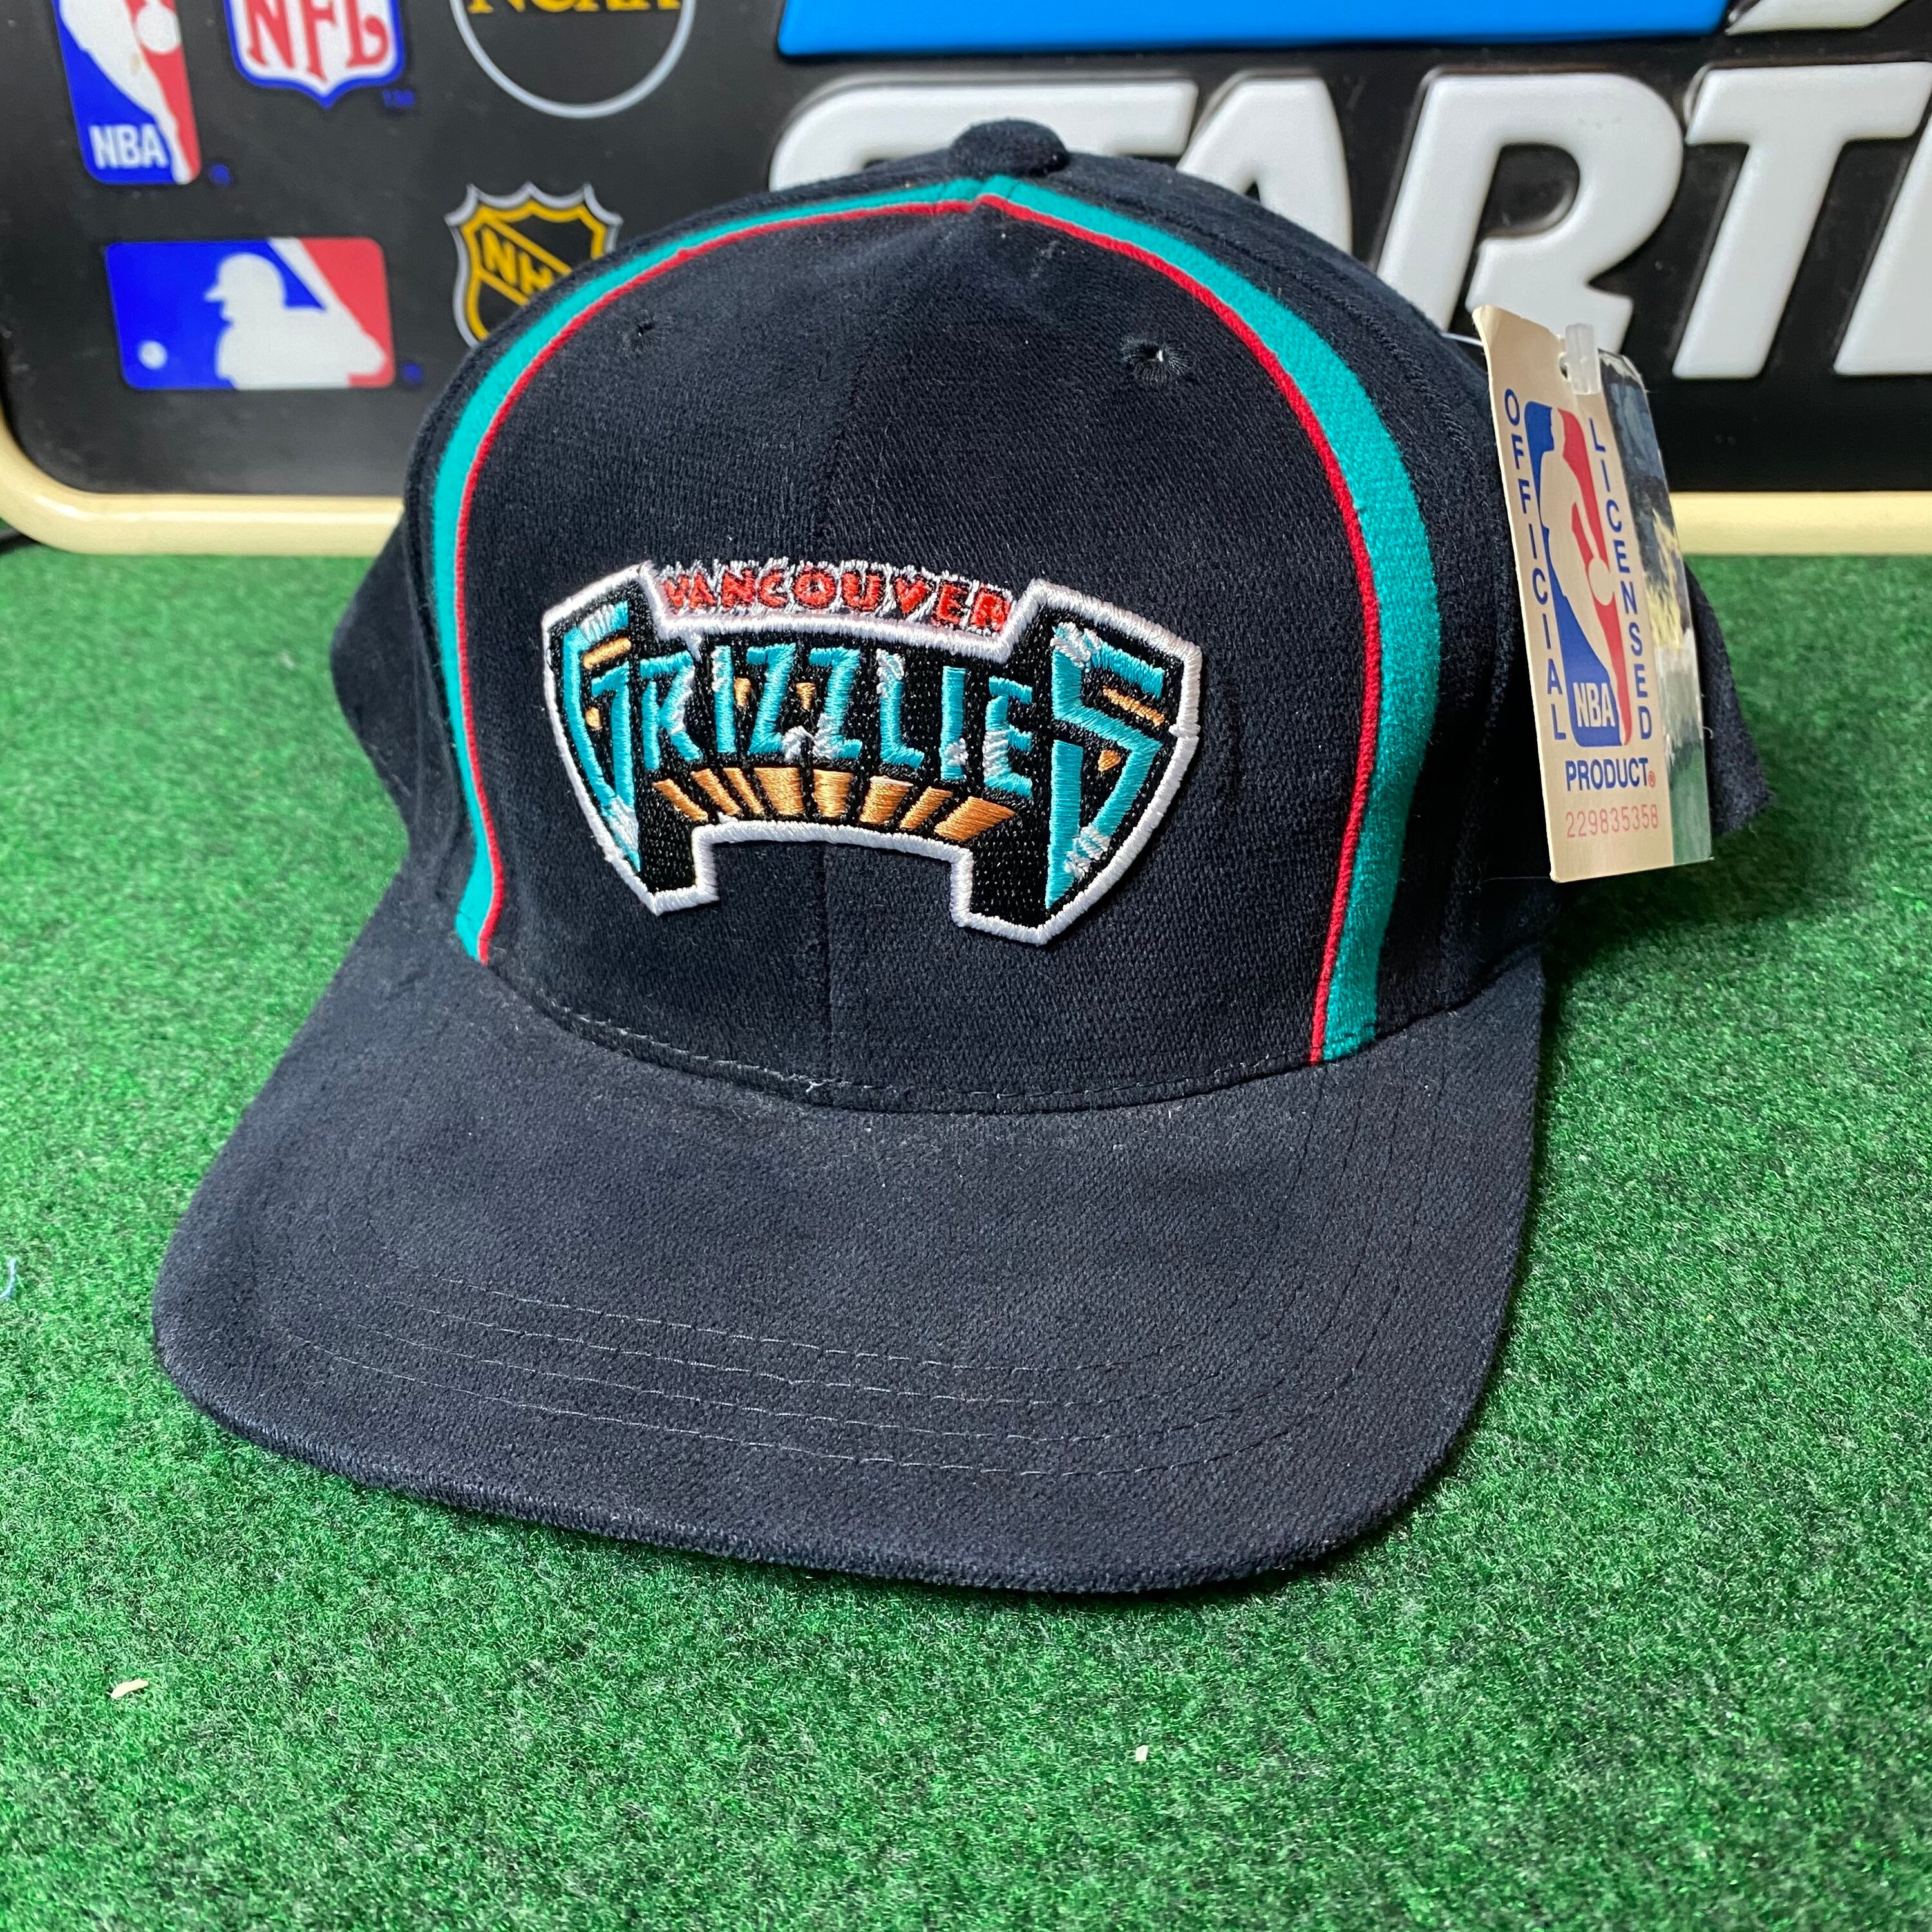 Adidas Memphis Grizzlies Hat Cap Youth Strapback Basketball Blue